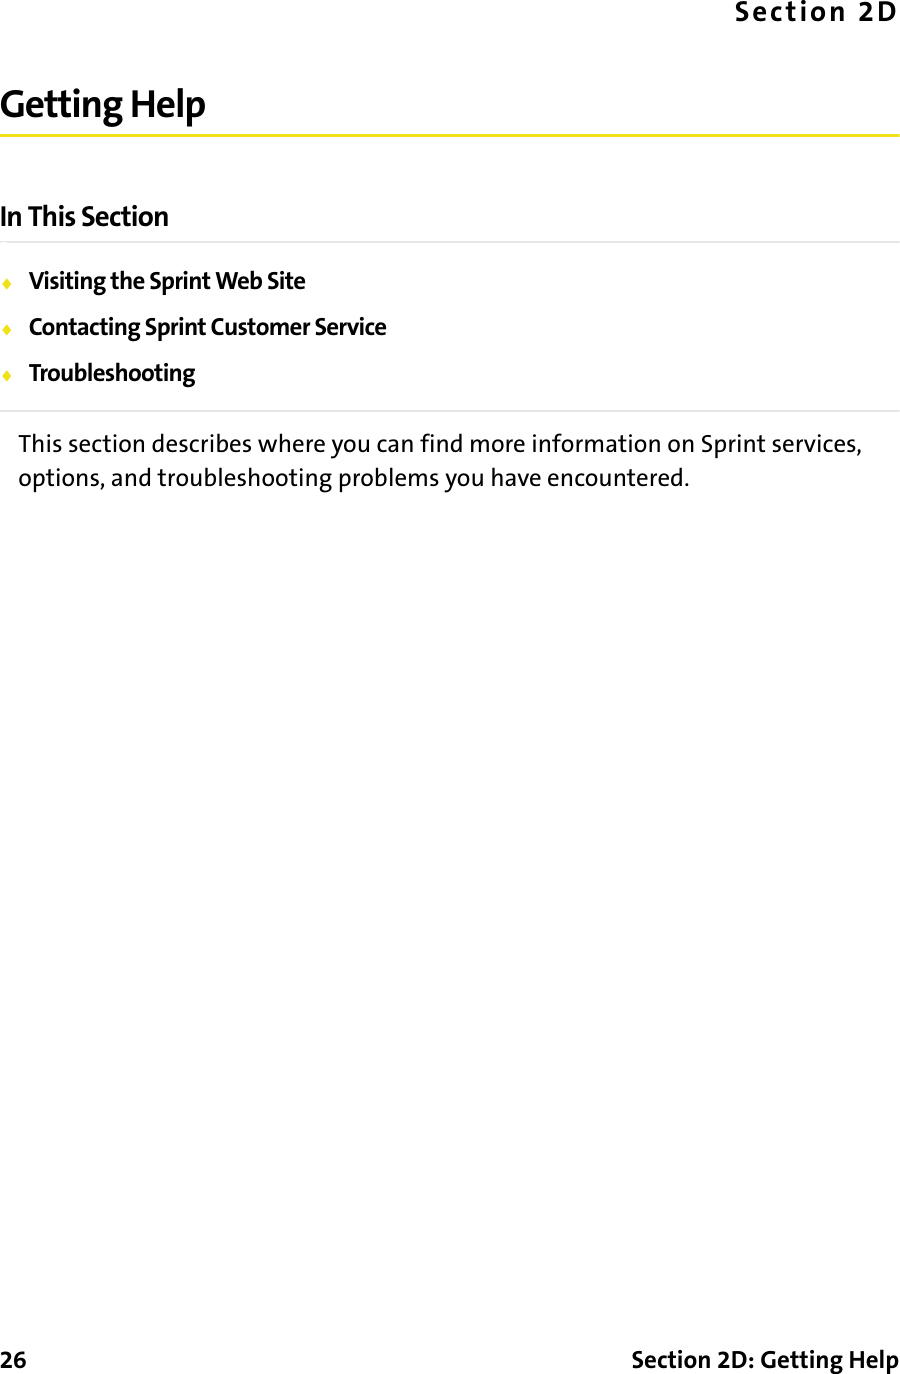 26 Section 2D: Getting HelpSection 2DGetting HelpIn This Section⽧Visiting the Sprint Web Site⽧Contacting Sprint Customer Service⽧TroubleshootingThis section describes where you can find more information on Sprint services, options, and troubleshooting problems you have encountered.